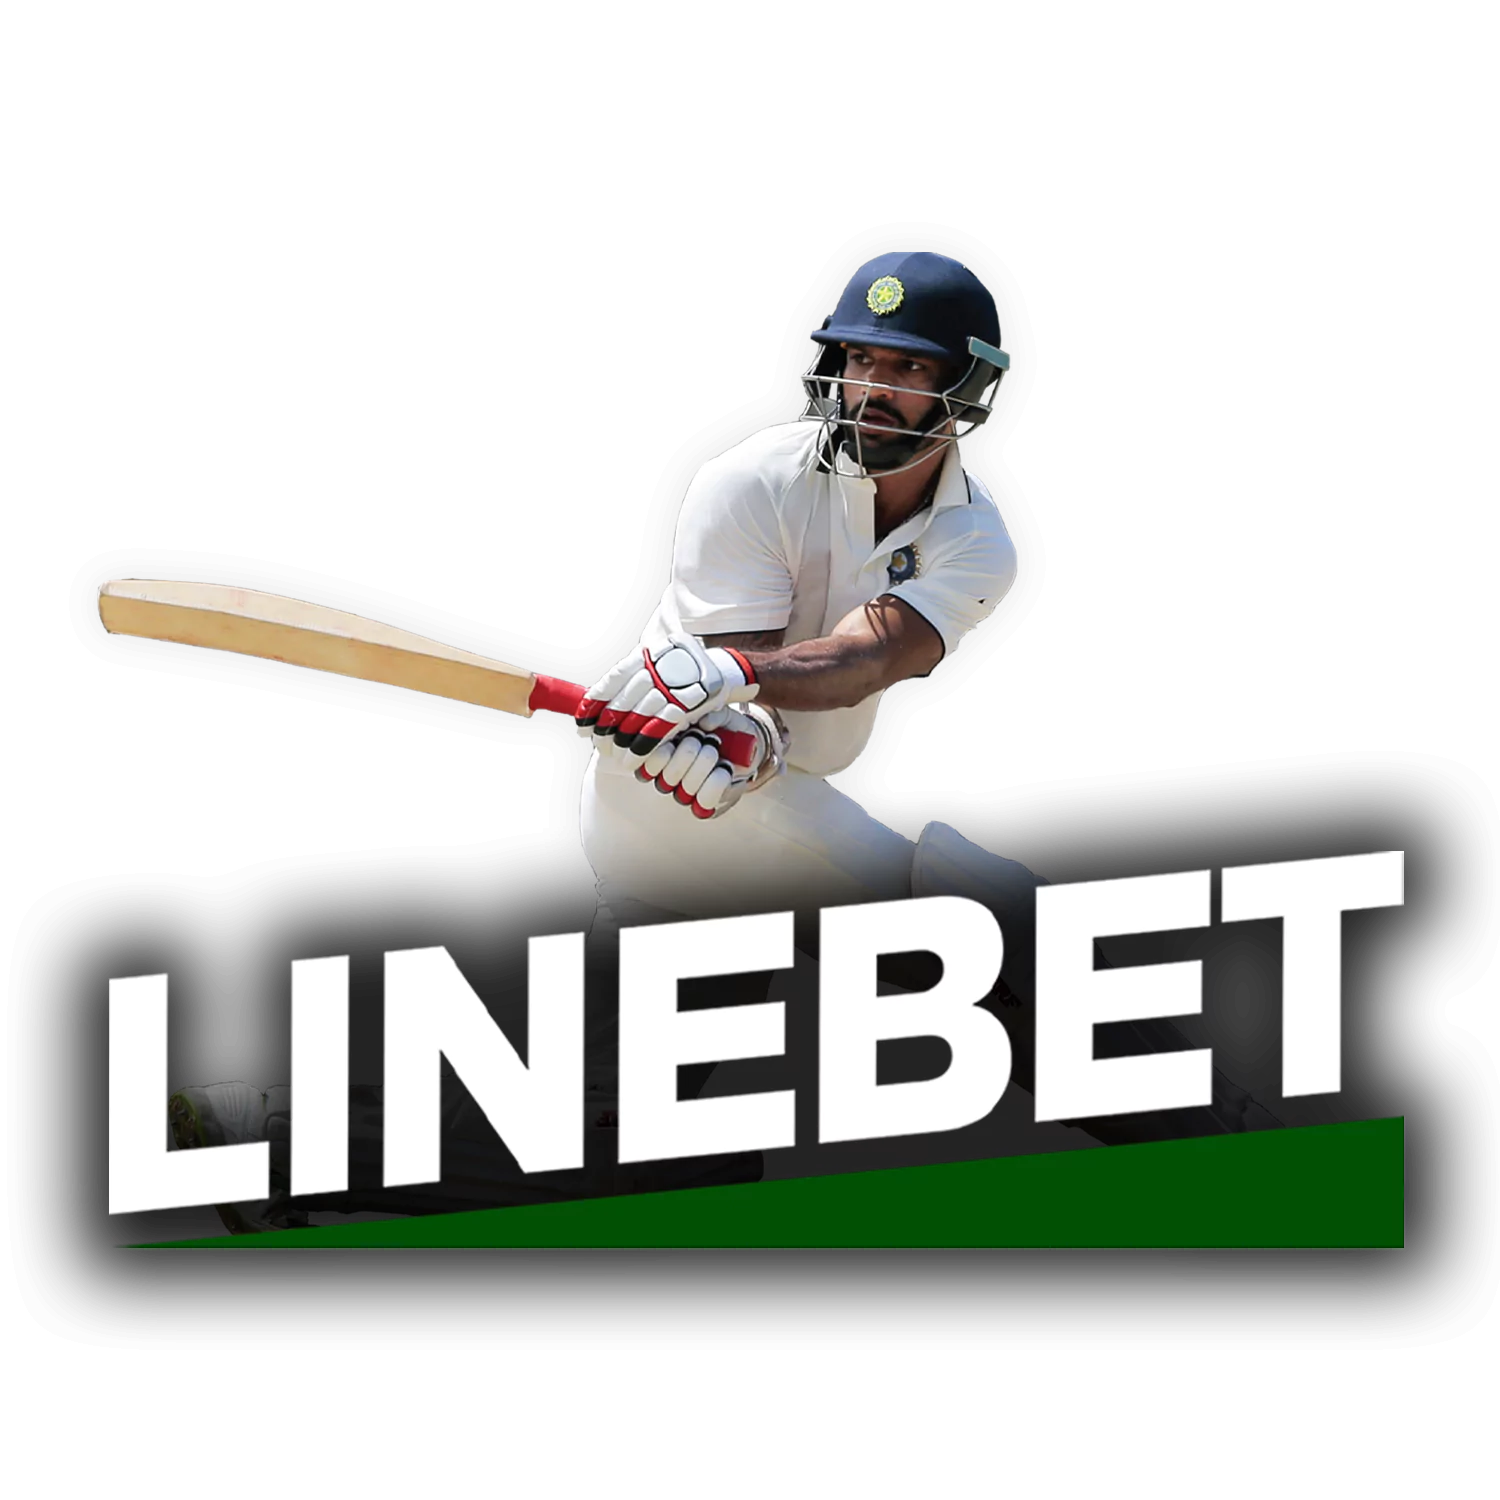 Linebet offers sports betting and online casino in Bangladesh.